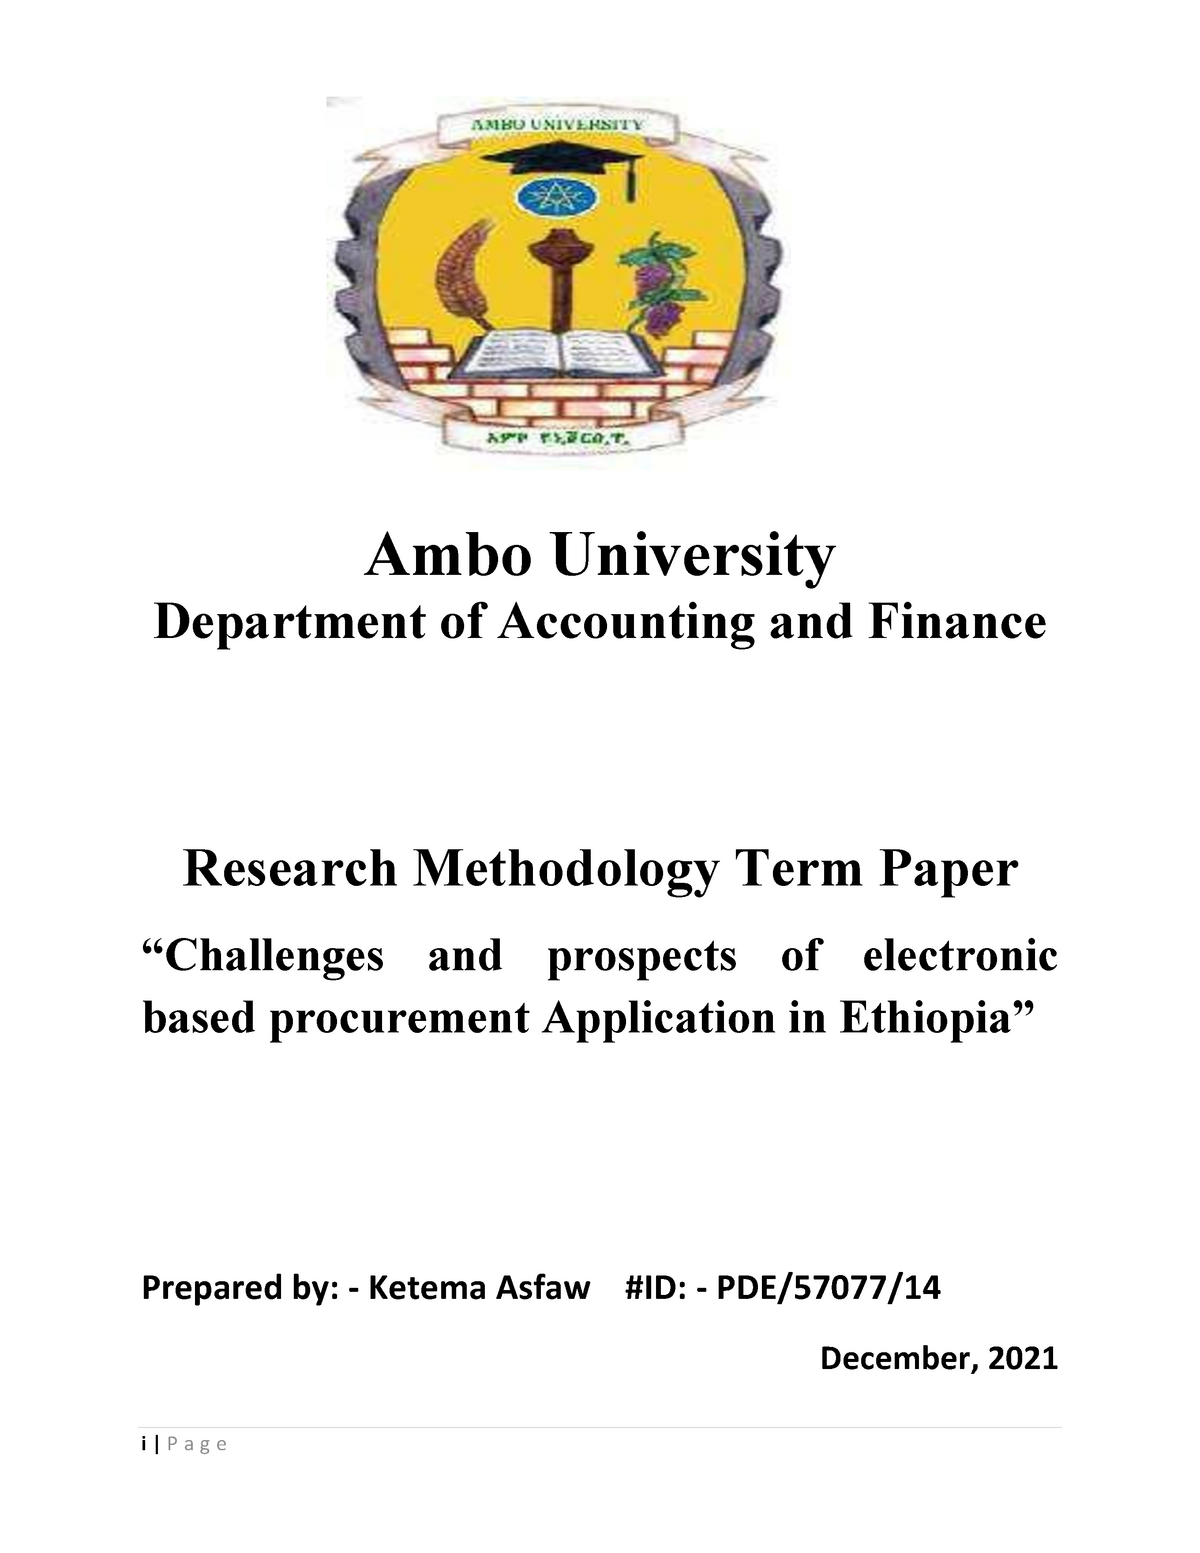 research proposal on accounting and finance in ethiopia pdf